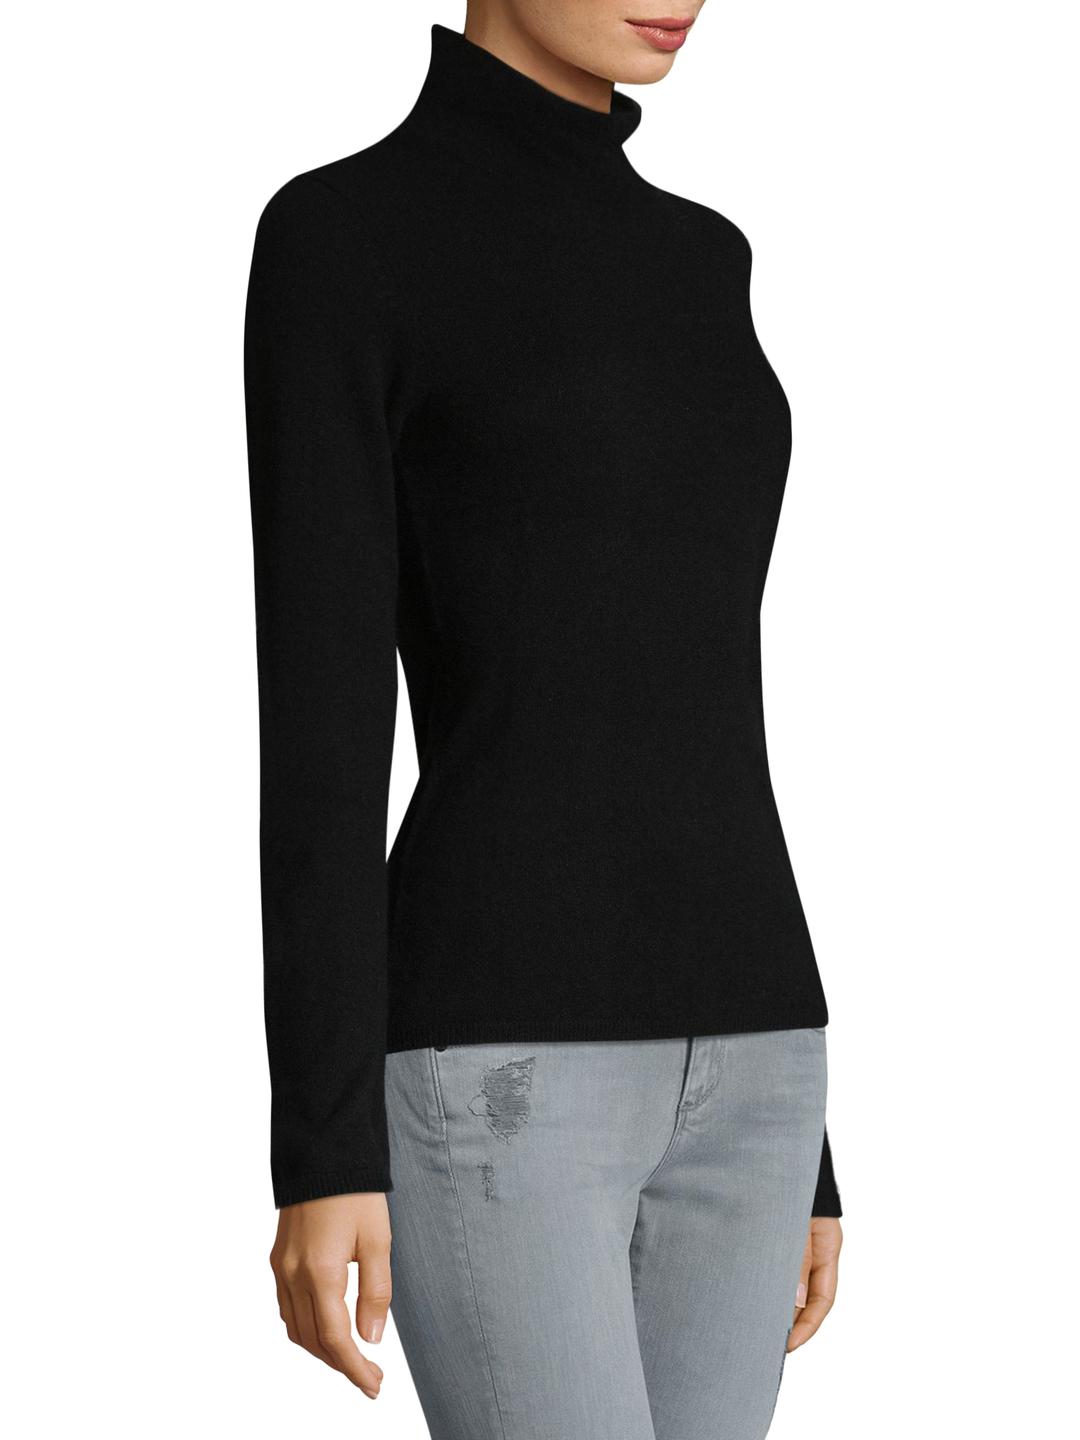 Download Lyst - Barrow & Grove Cashmere Mock Neck Sweater in Black